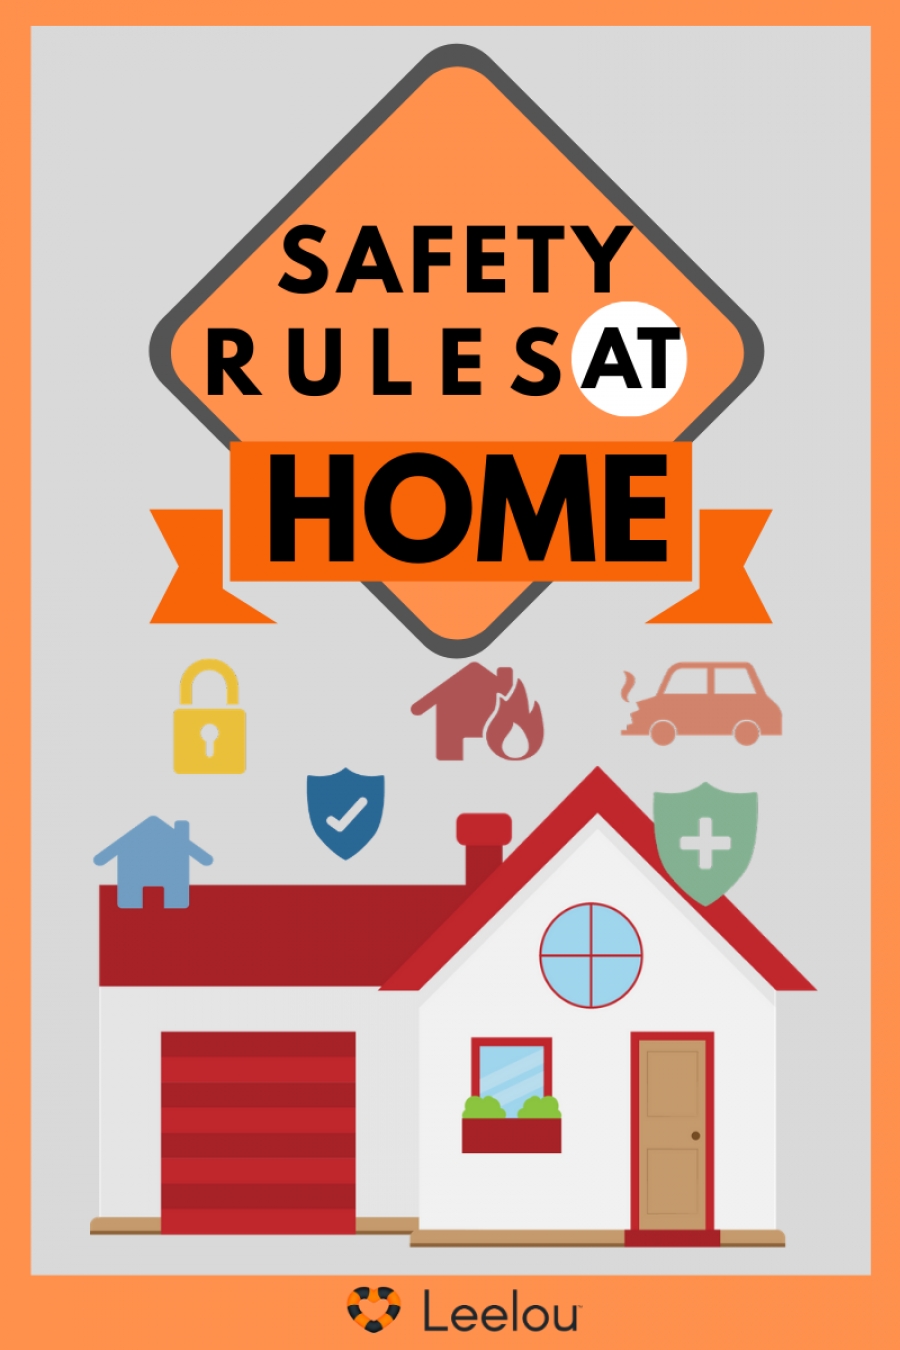 What are the safety rules at home?